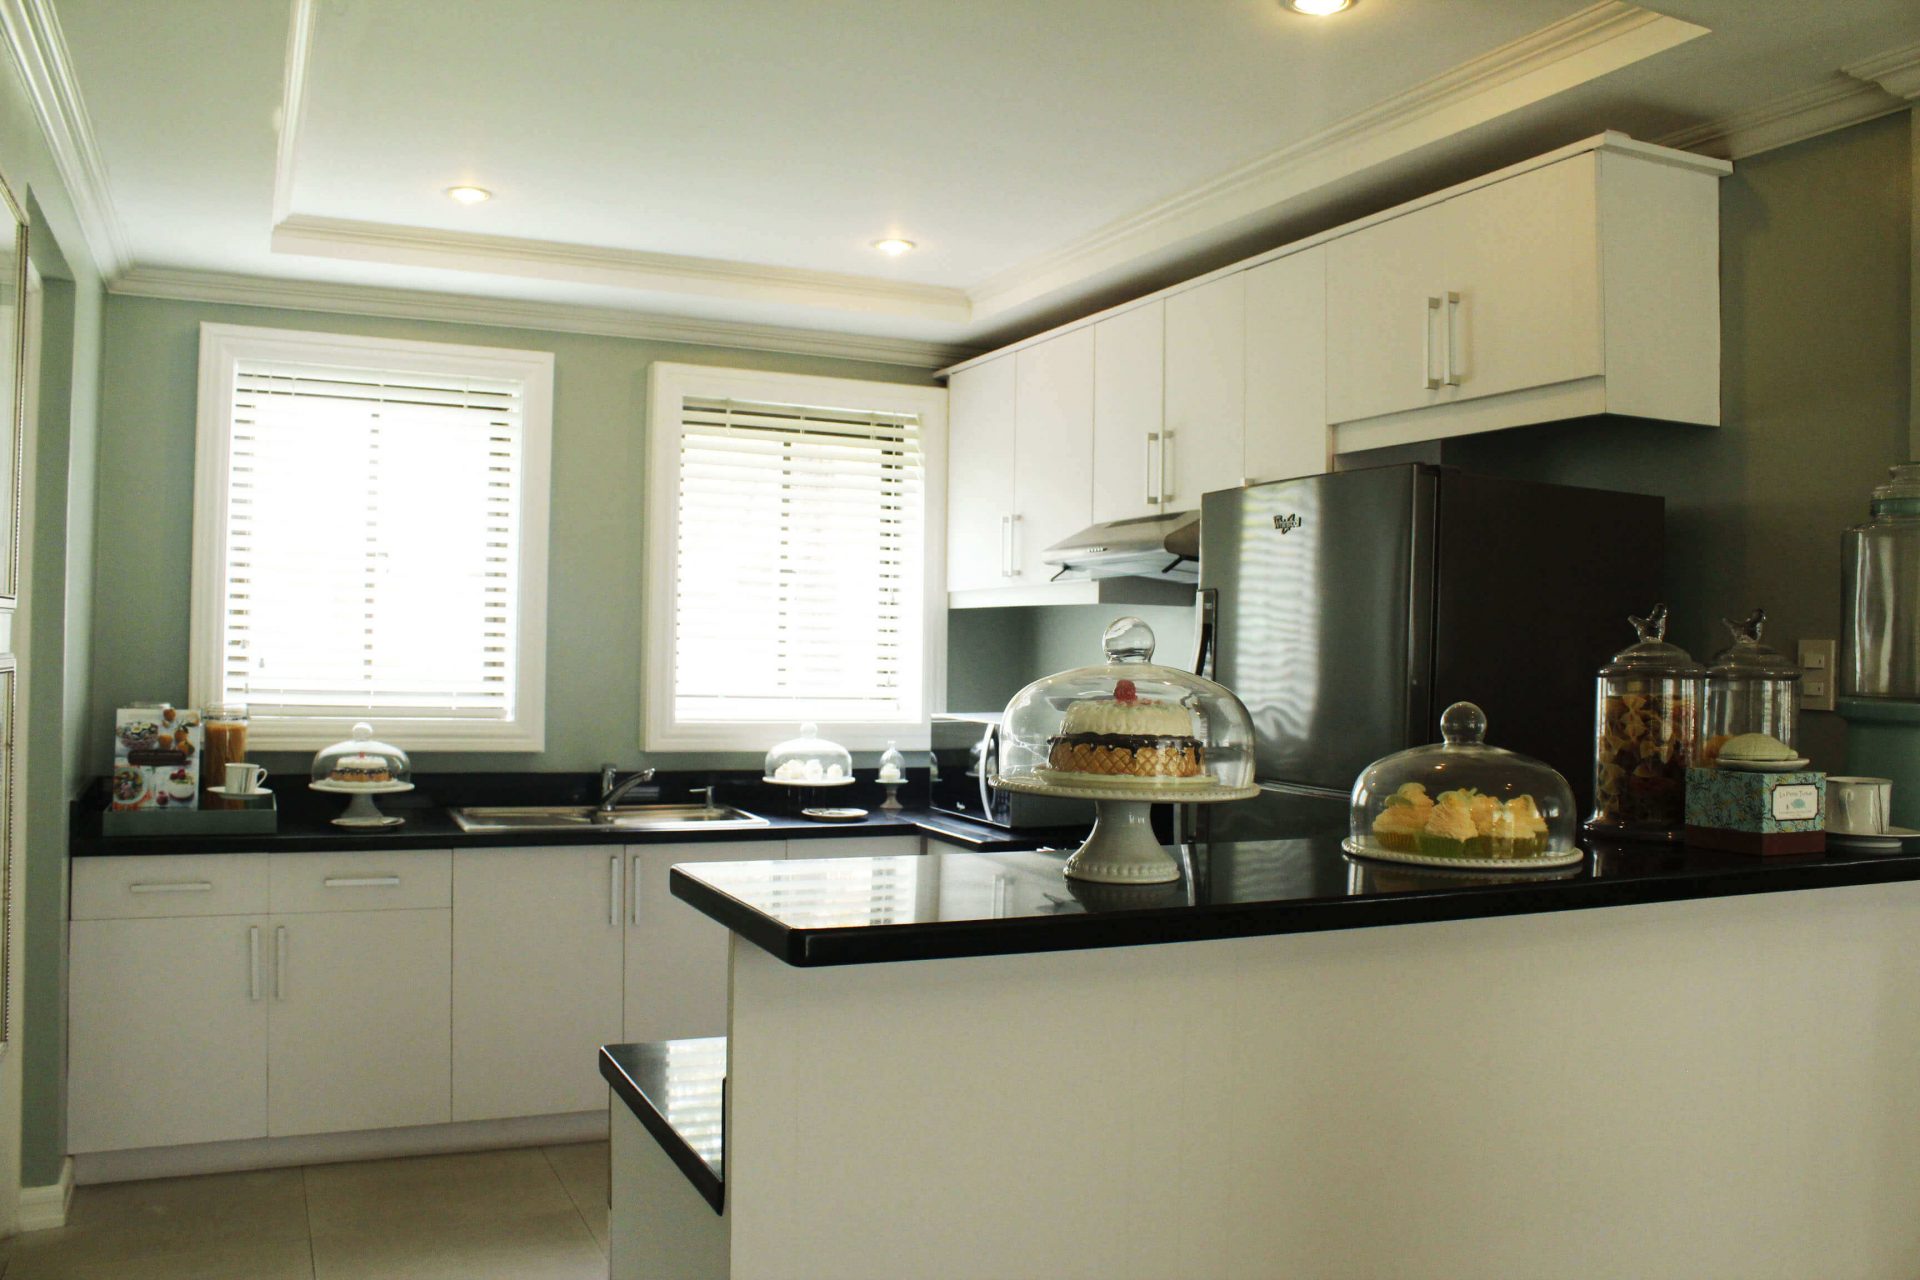 Vista Alabang | Portofino South | Leandro House Model Kitchen and Pantry | Luxury Homes by Brittany Corporation